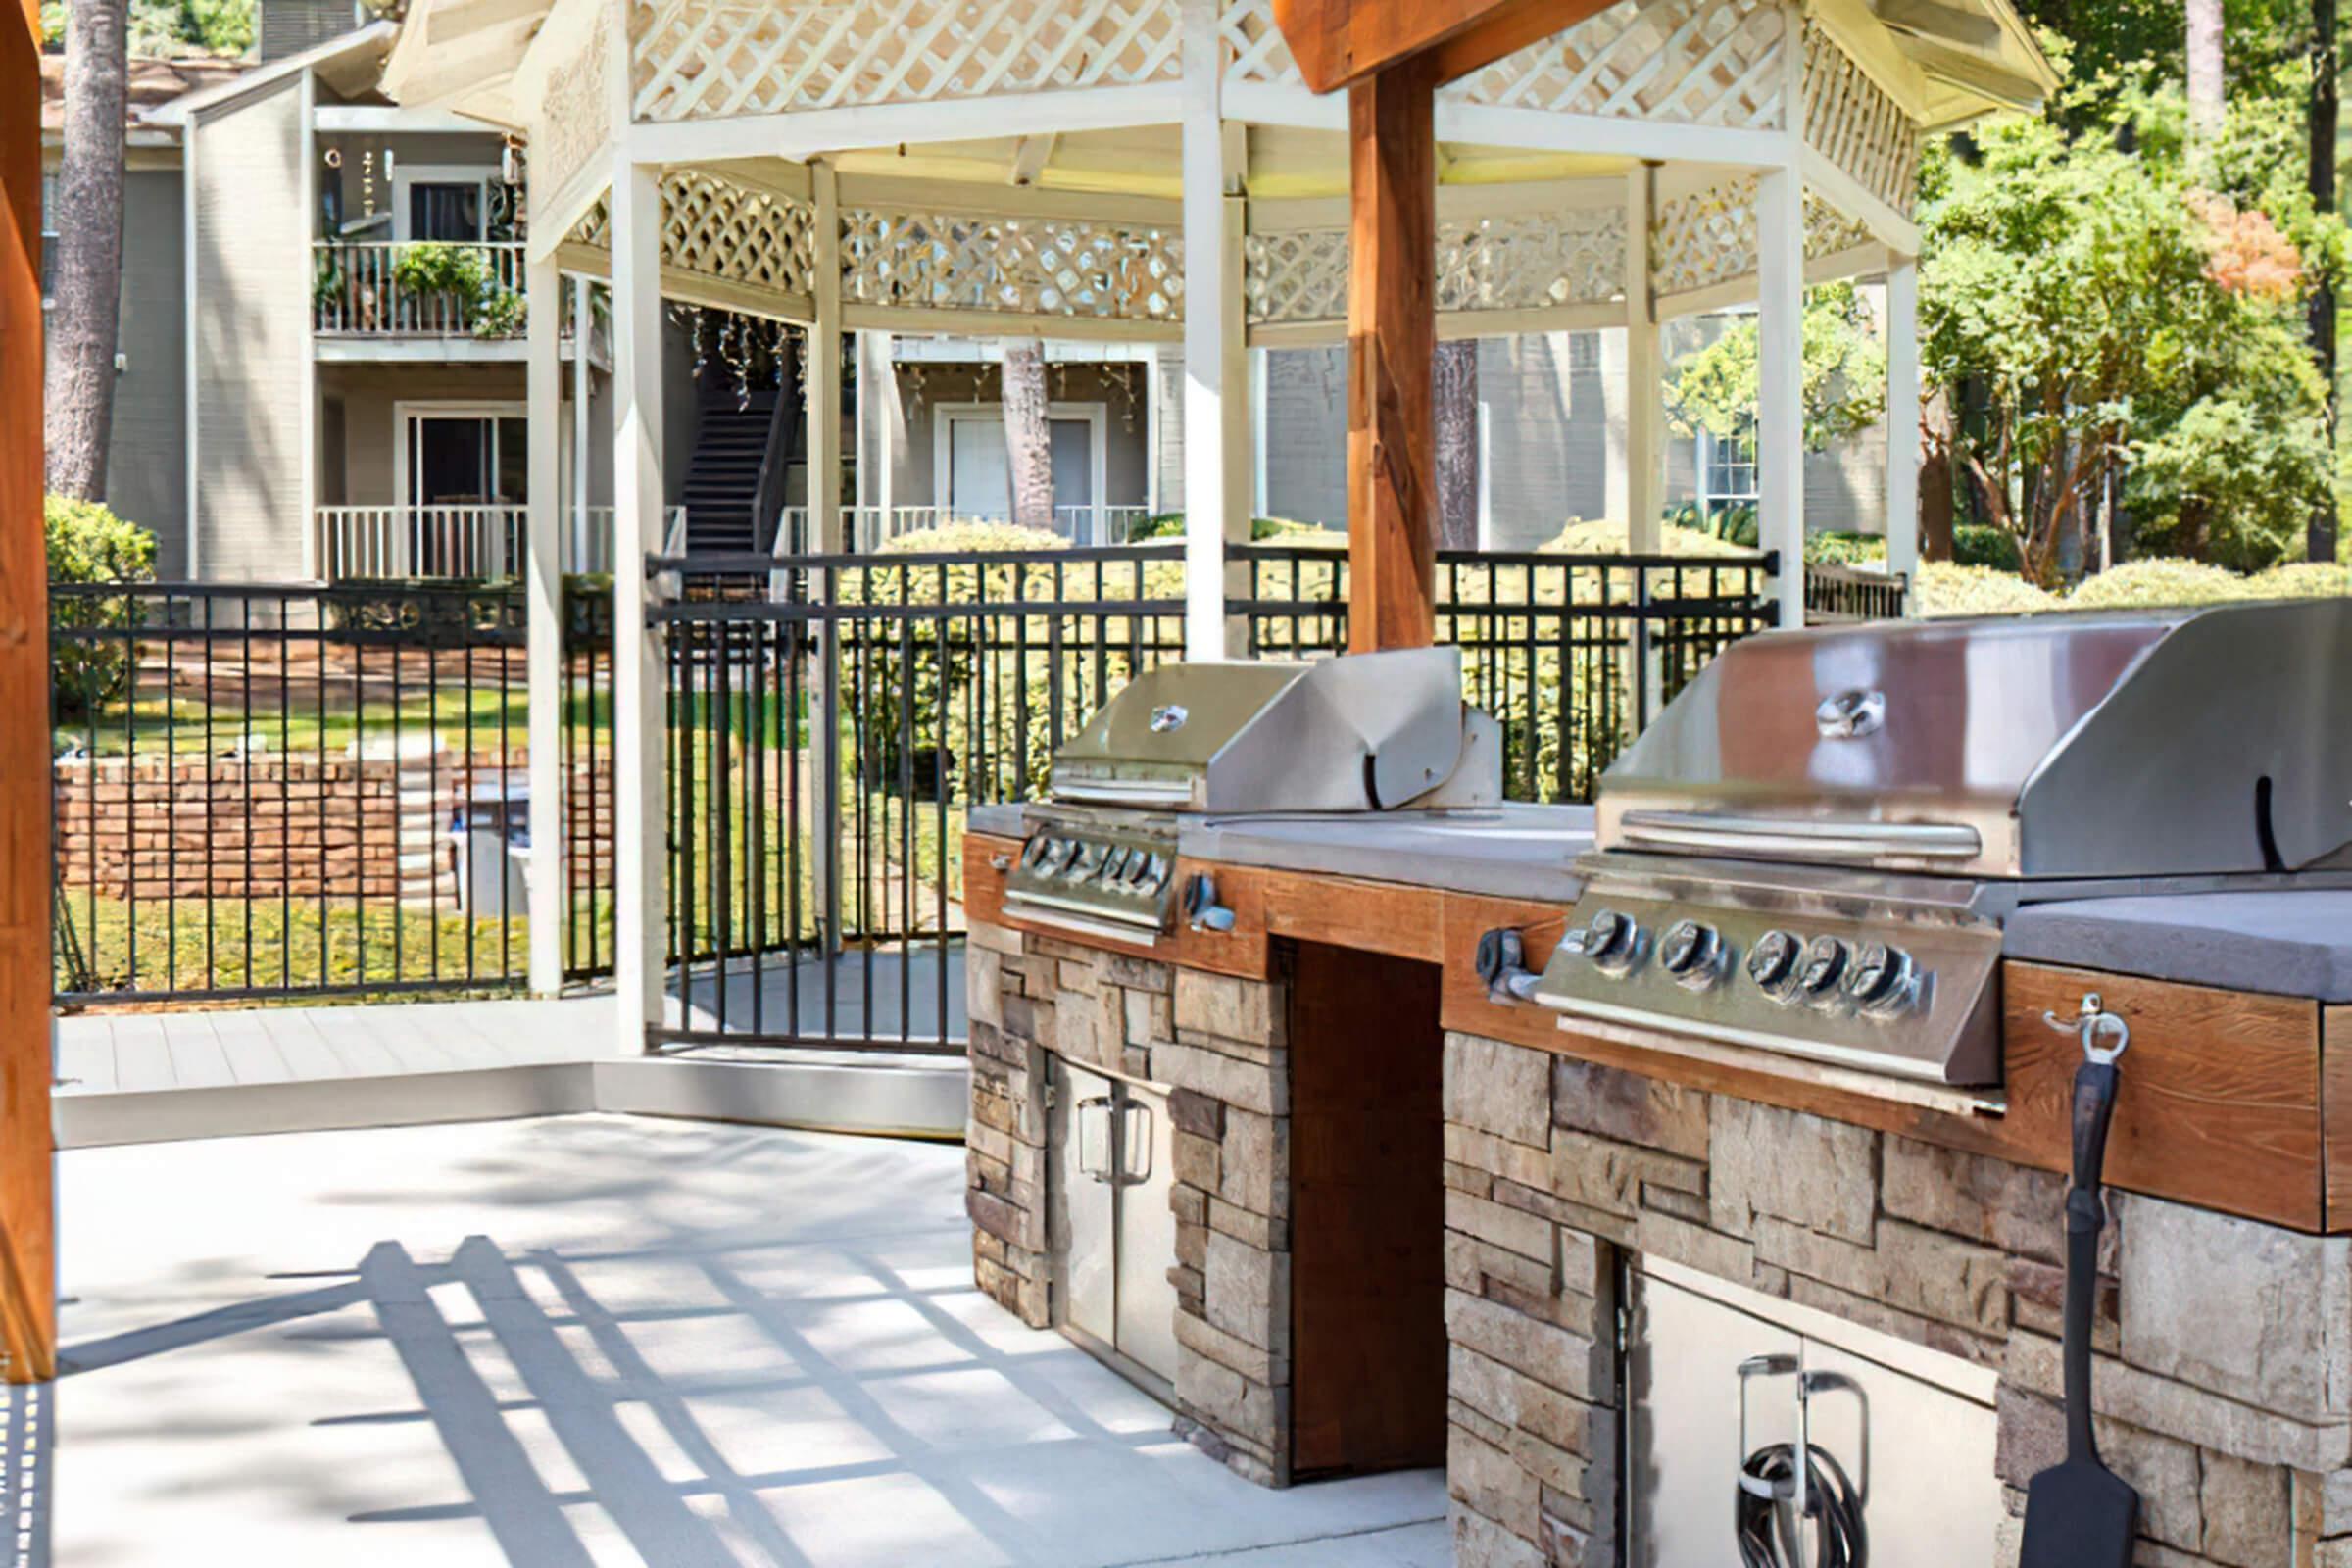 GRILLING STATIONS FOR OUTDOOR MEALS